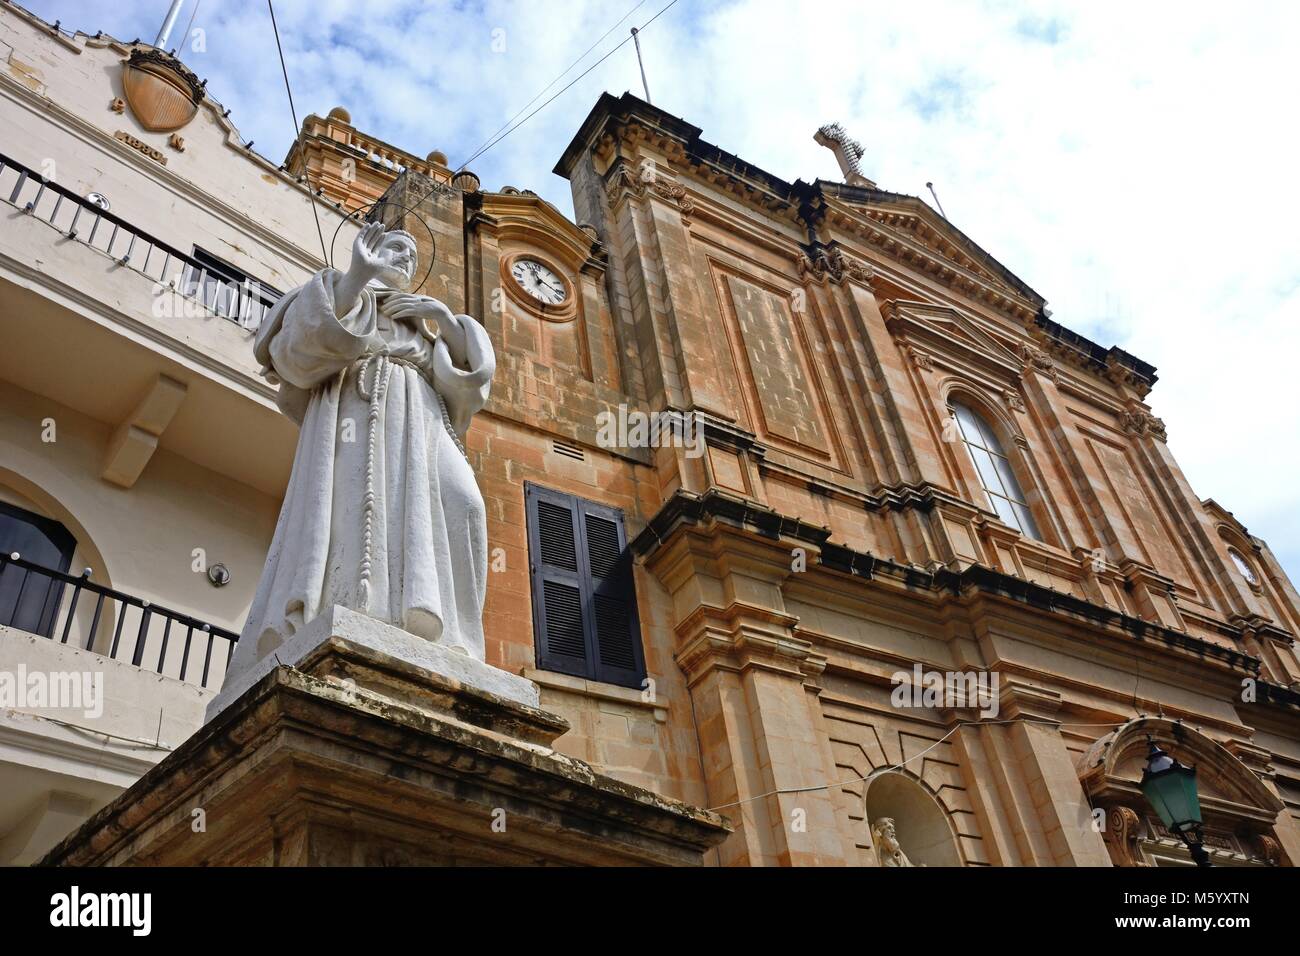 Front view of the Parish church of our lady of sorrows with a statue in the foreground, Bugibba, Malta, Europe. Stock Photo